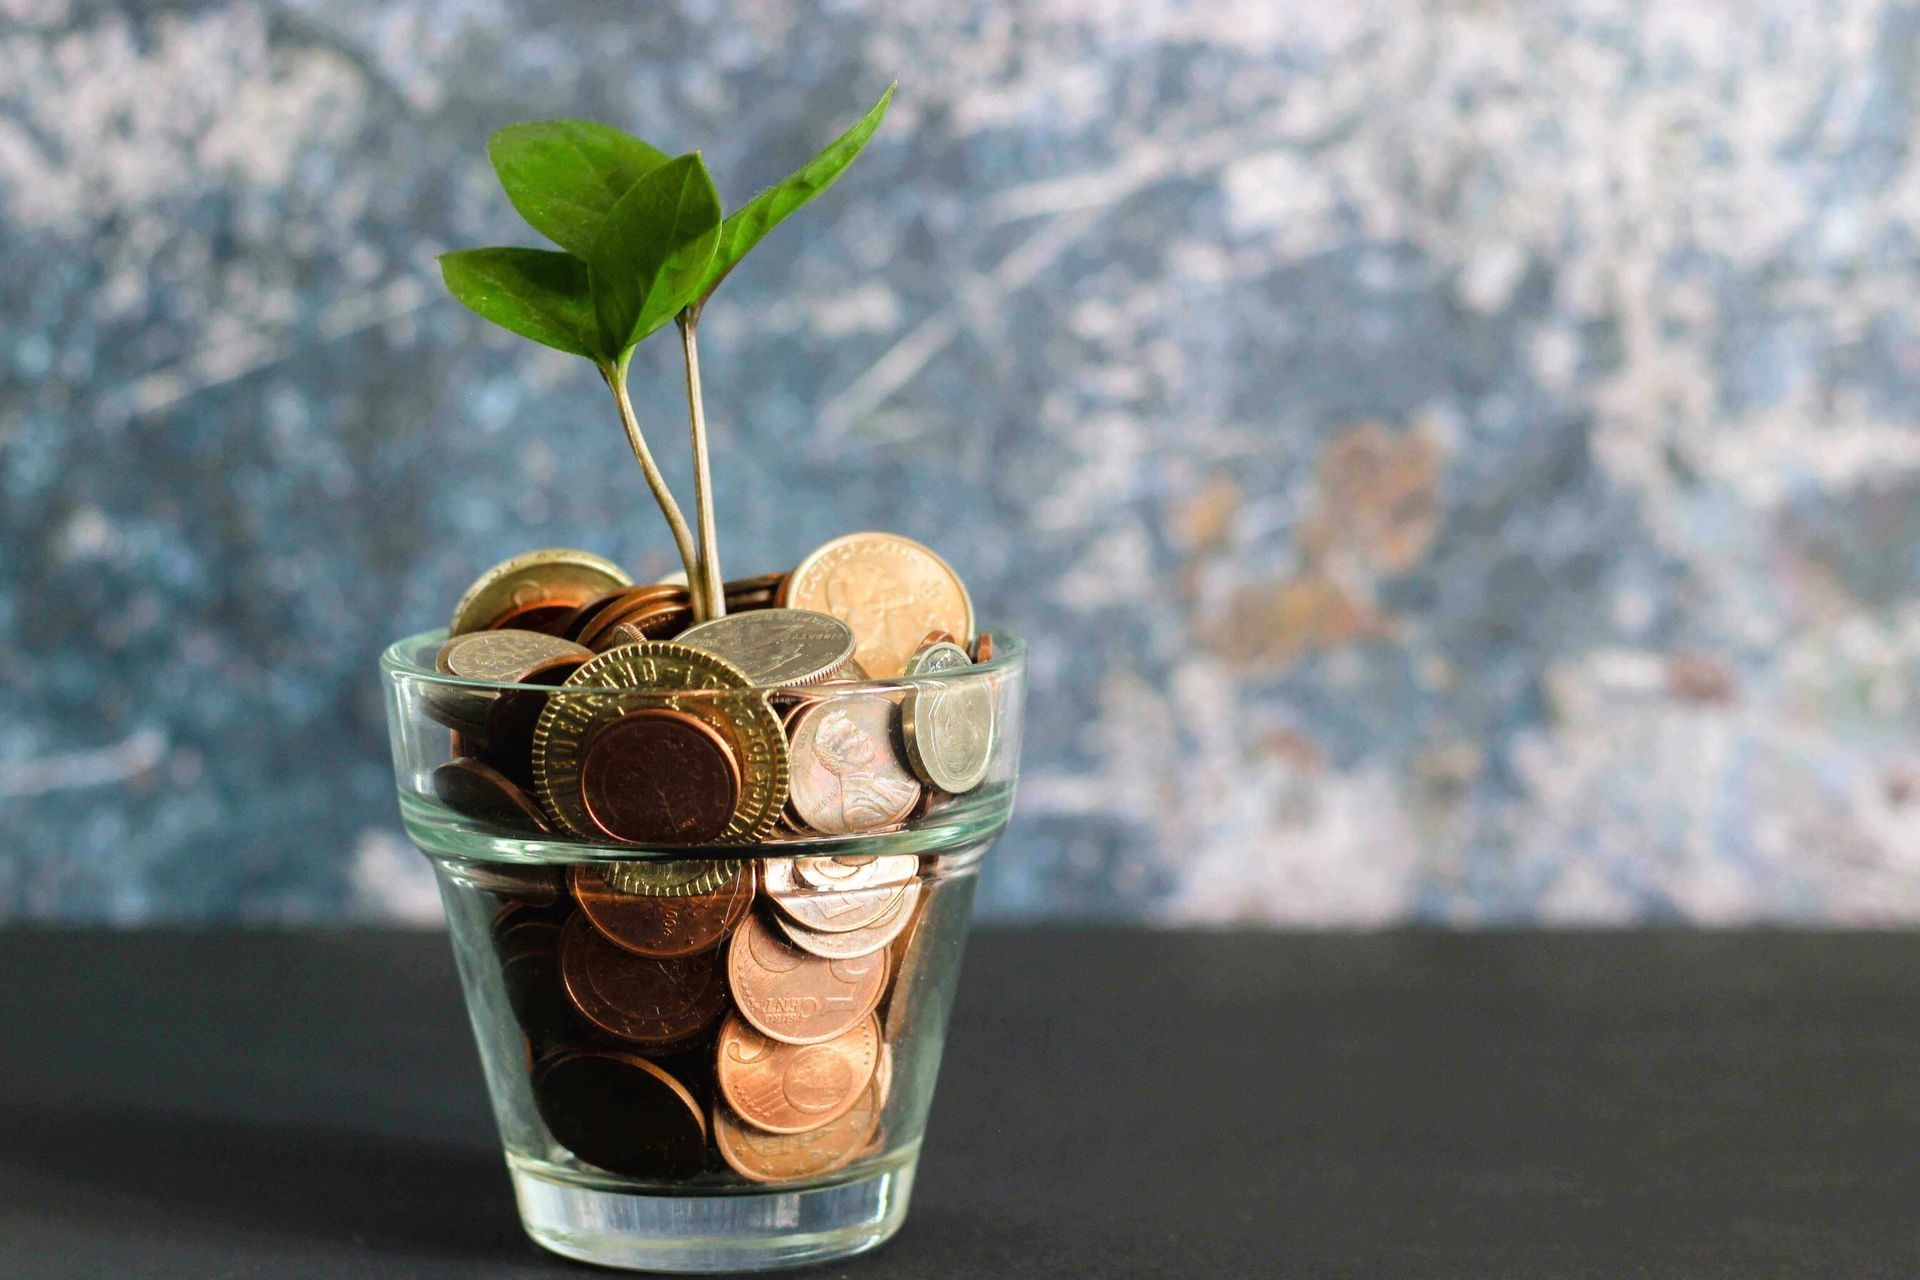 a glass vase filled with coins and a plant